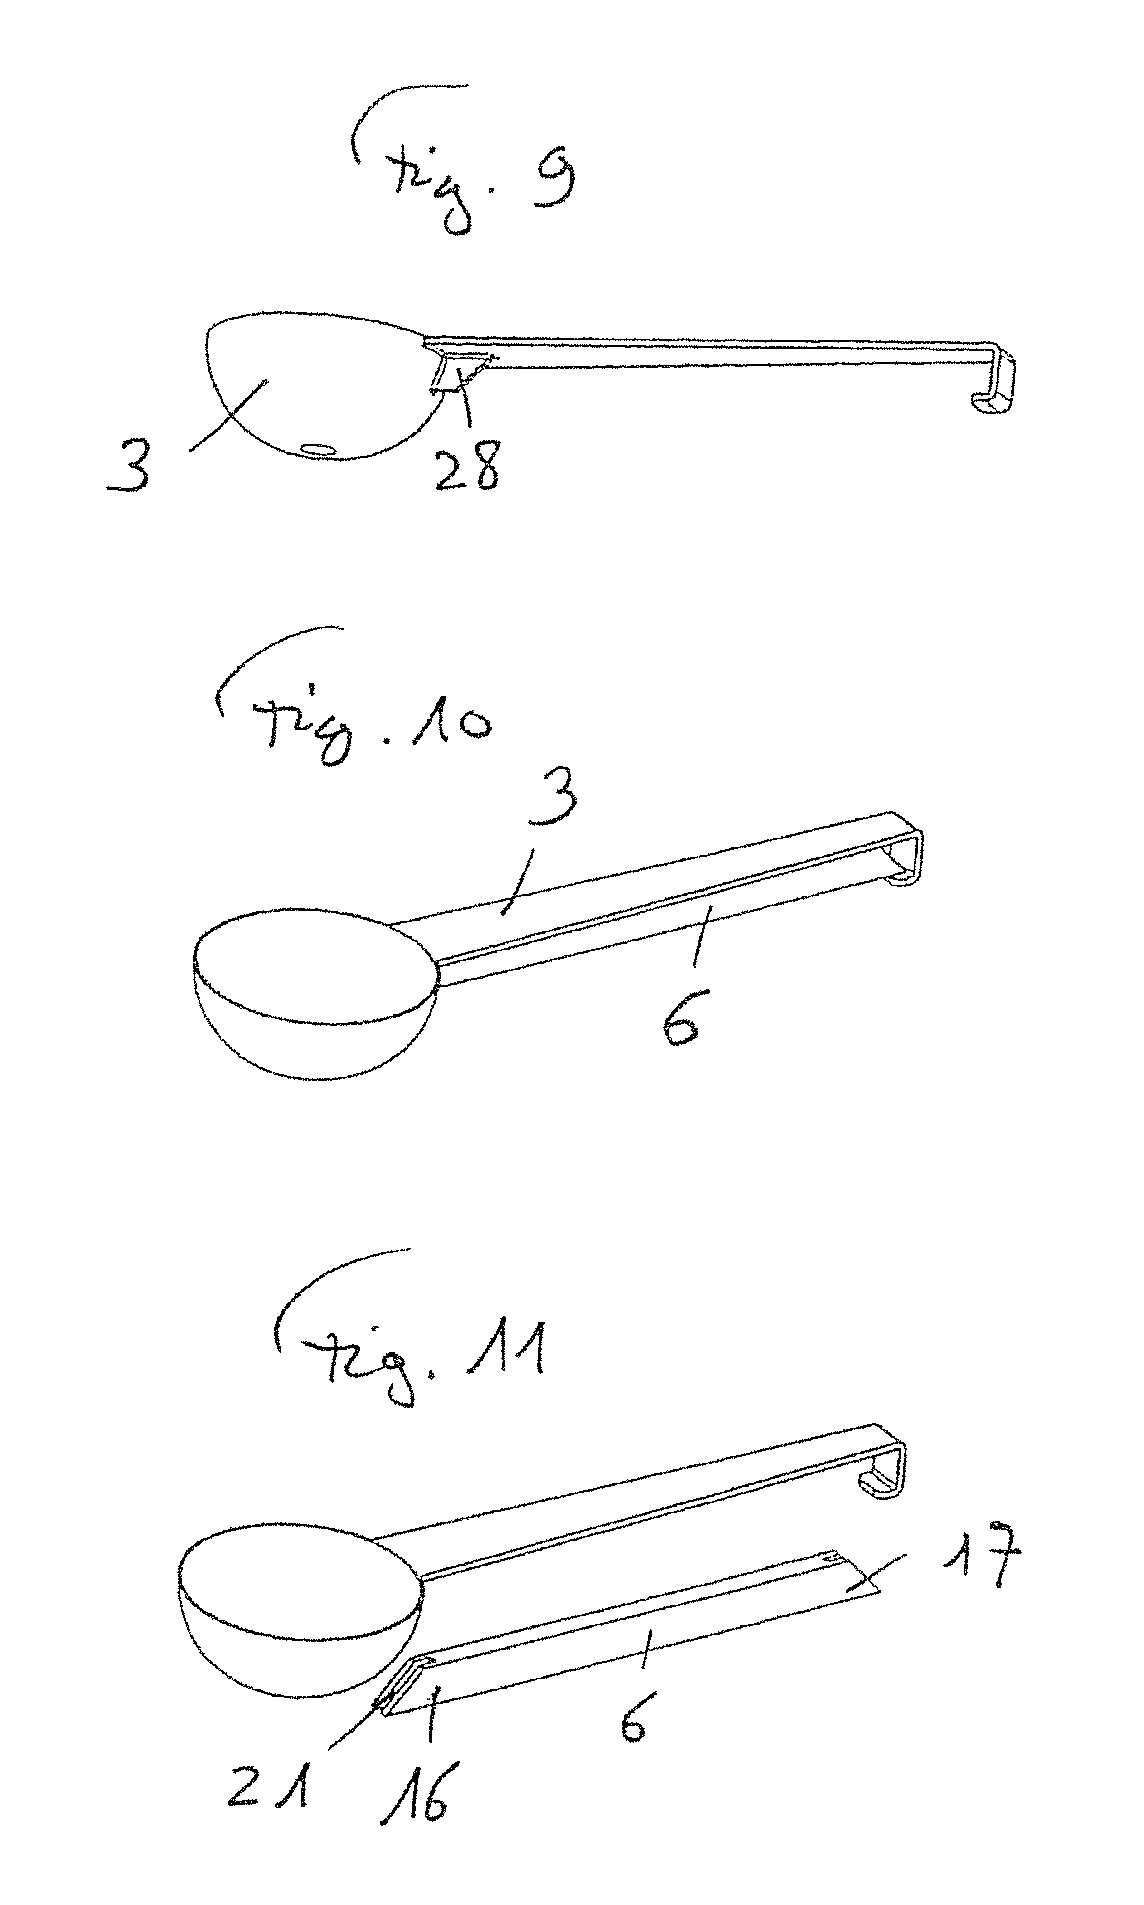 Package comprising peel-off lid and dosing spoon